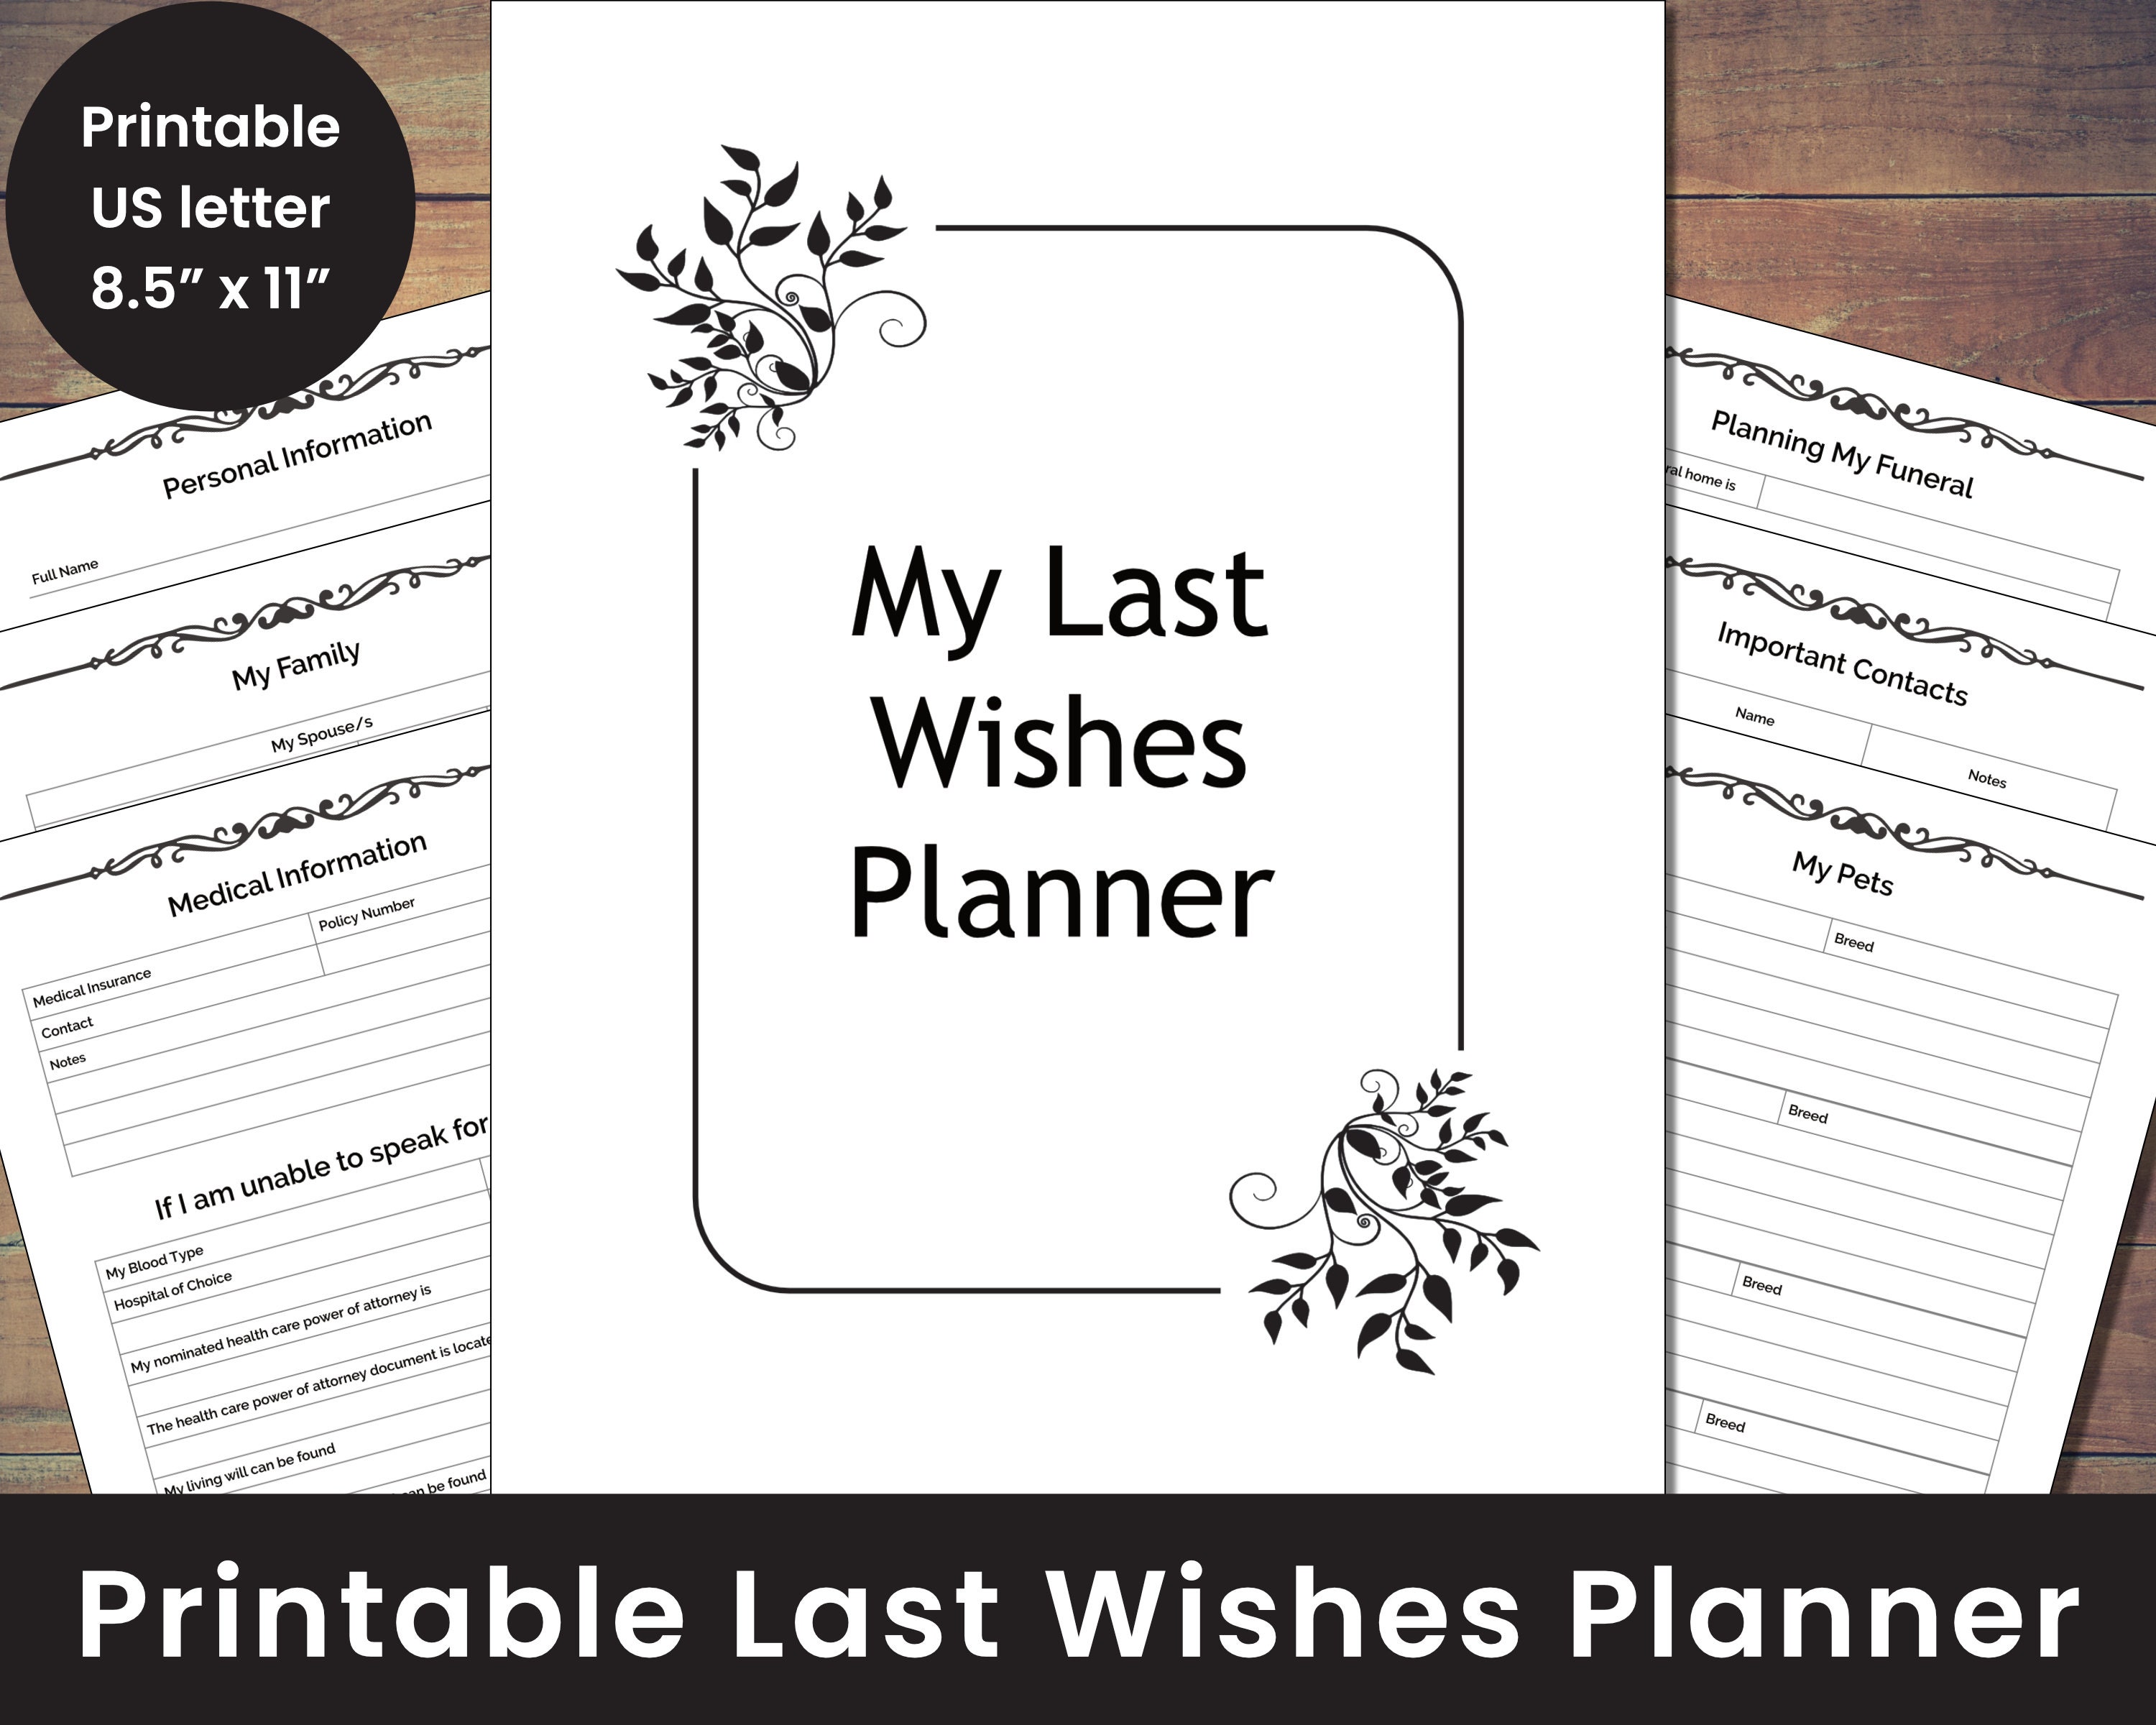 free-printable-final-wishes-planner